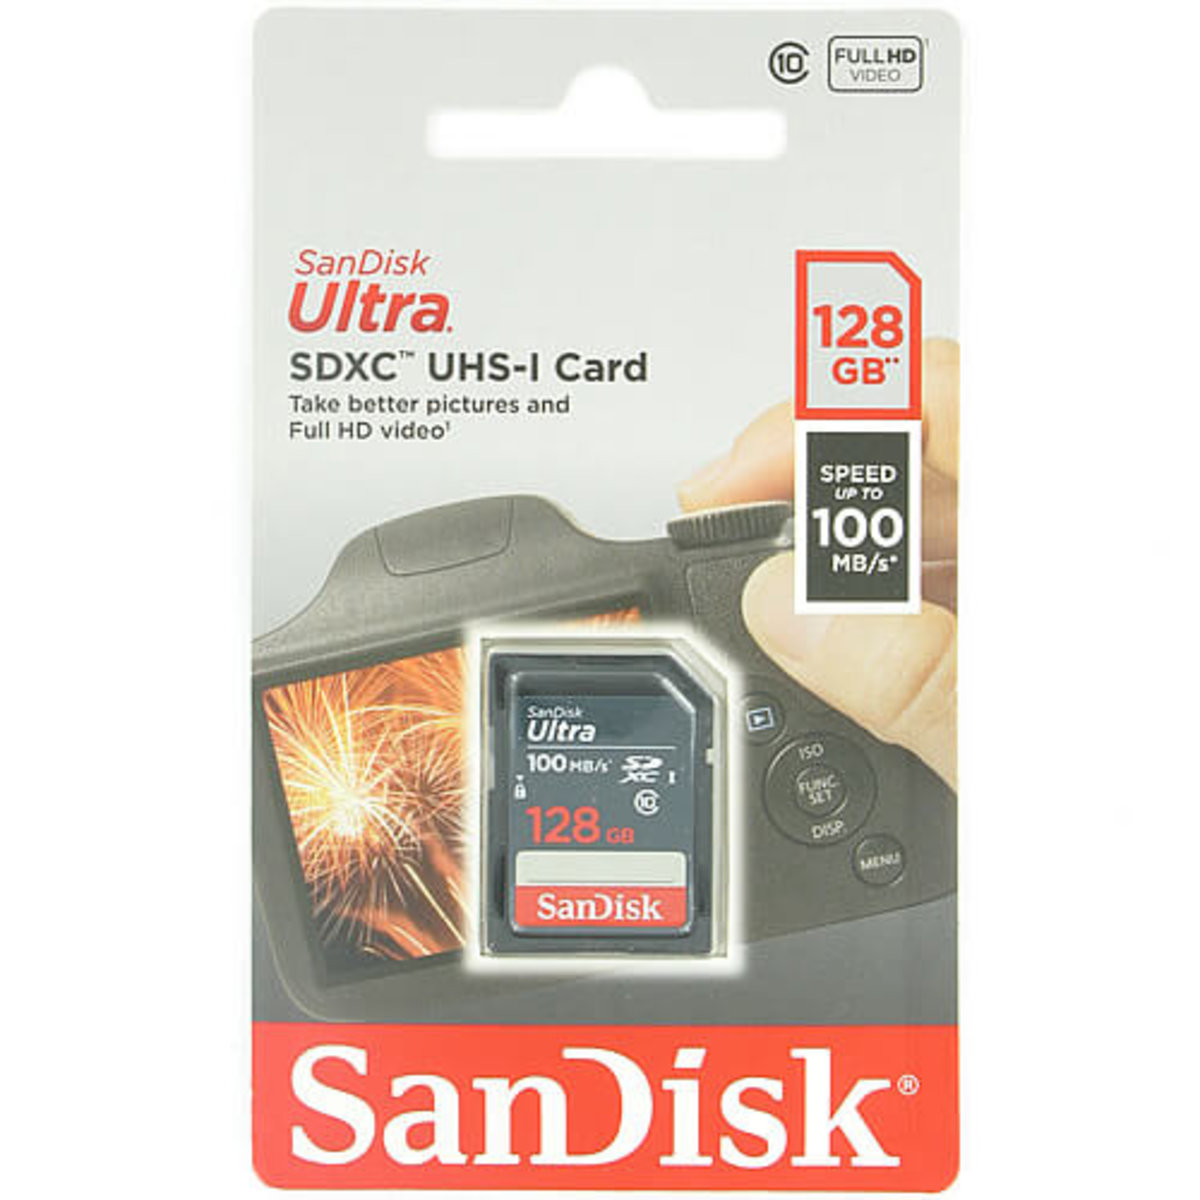 SDHC (UHS-1) SanDisk Ultra 128Gb class 10 (100Mb/s) - 2